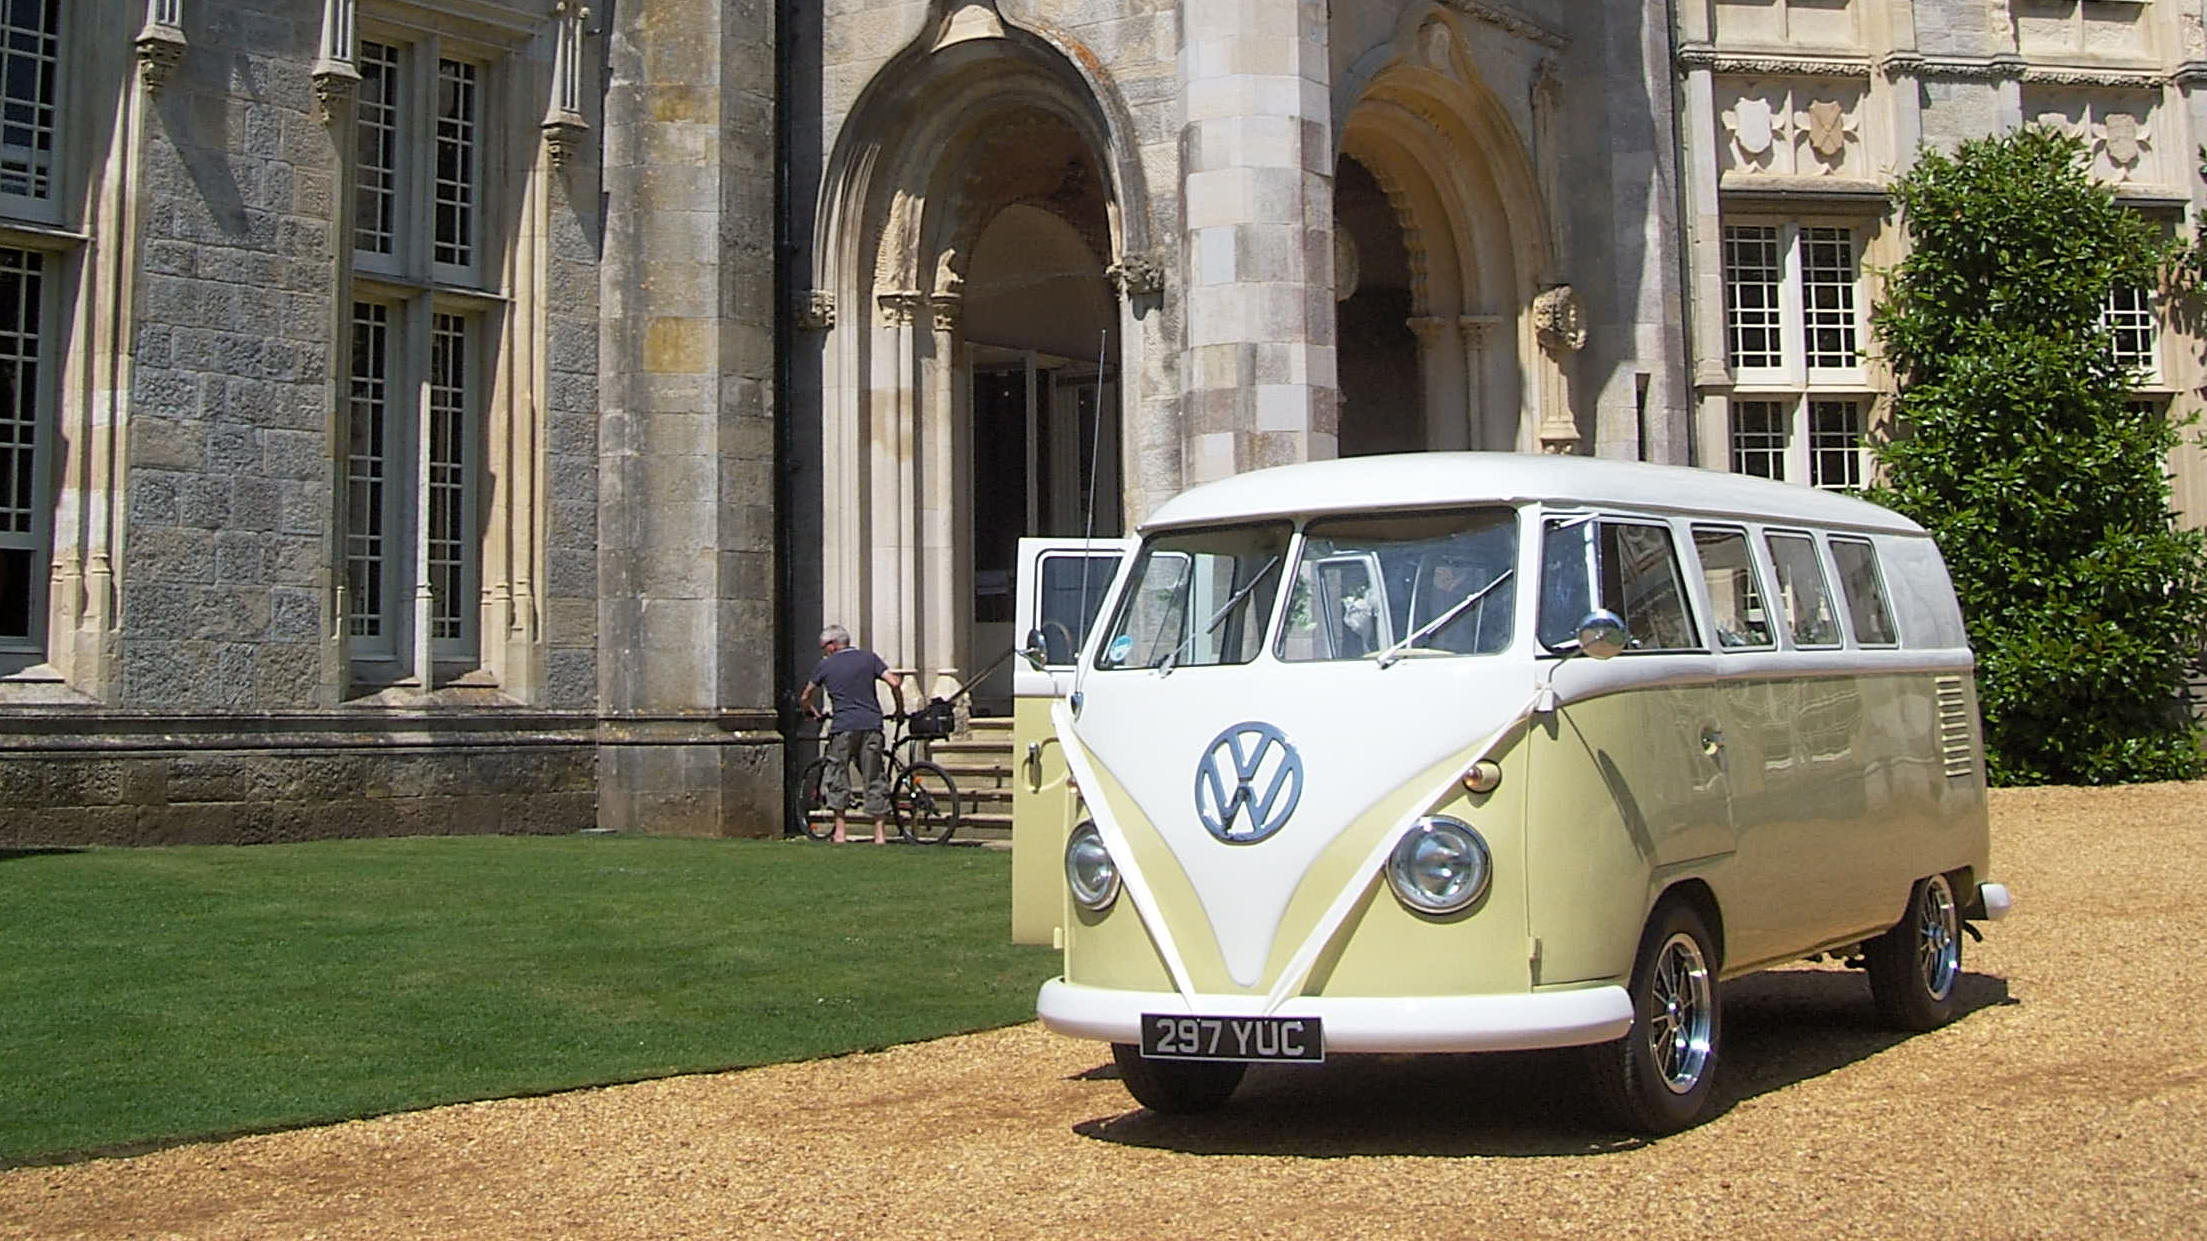 Retro Classic Volkswagen Campervan decorated with white ribbons at a local Halstock wedding venue.